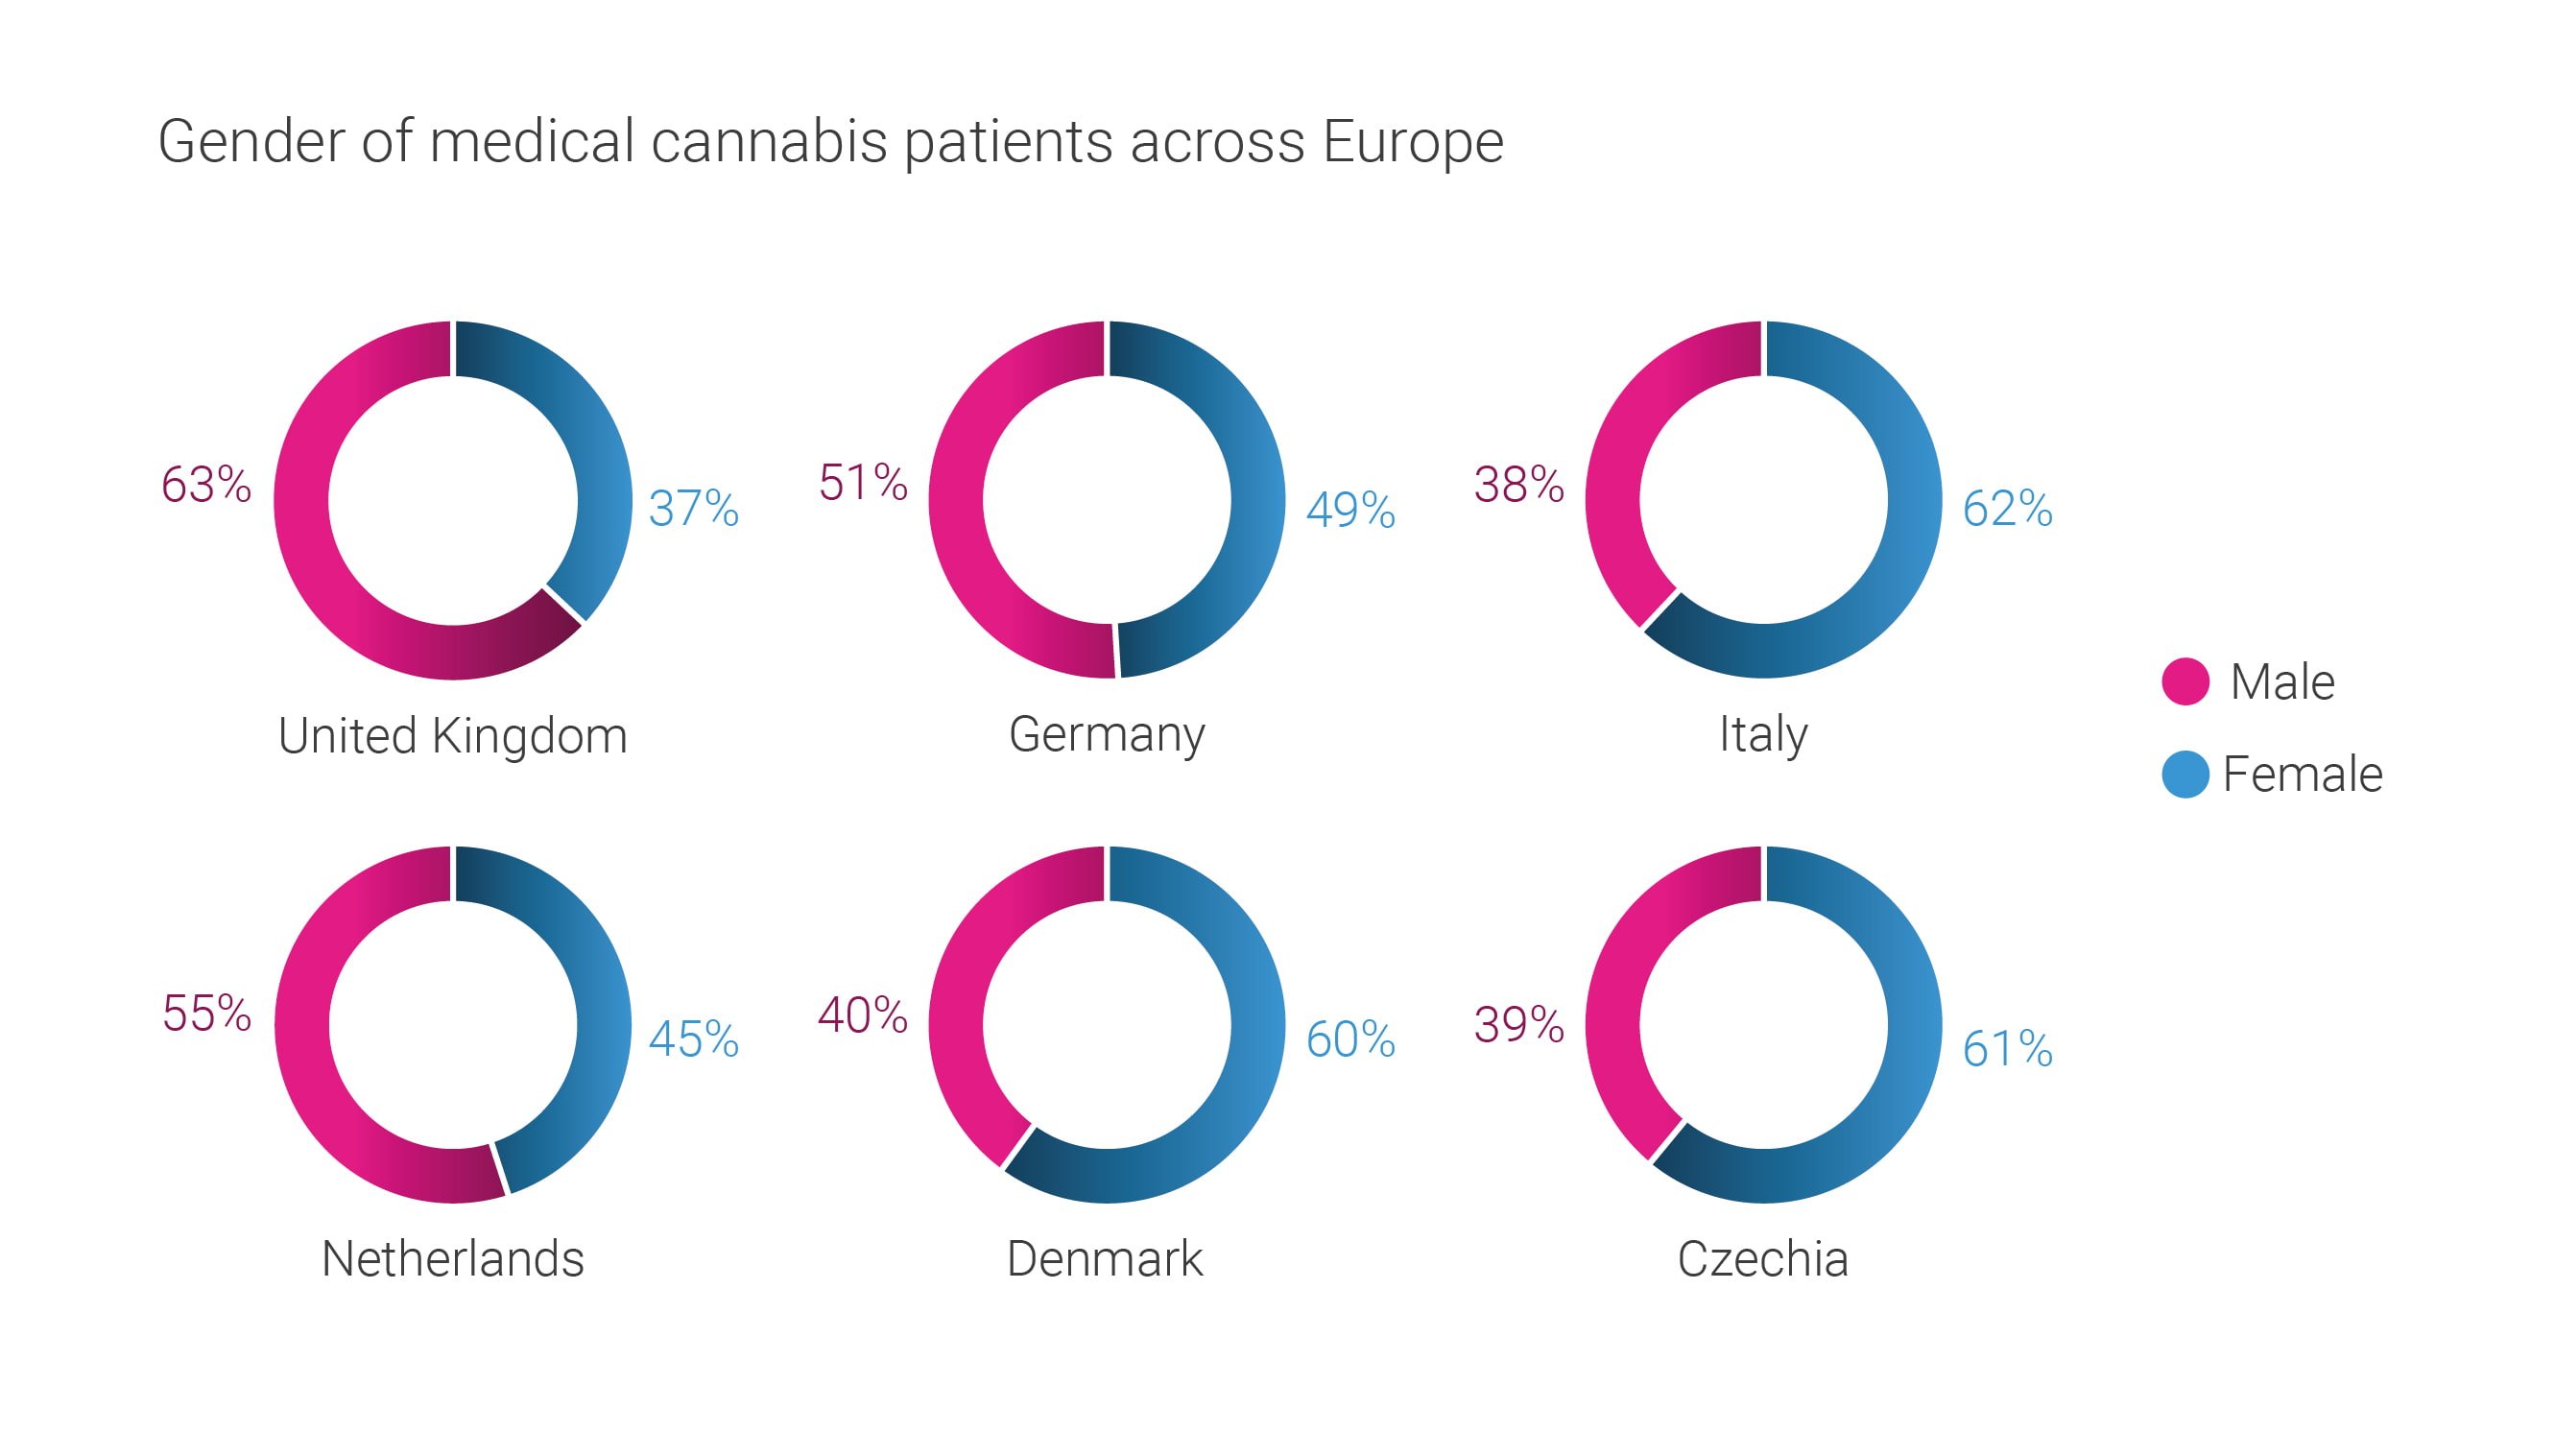 Gender of medical cannabis patients in Europe